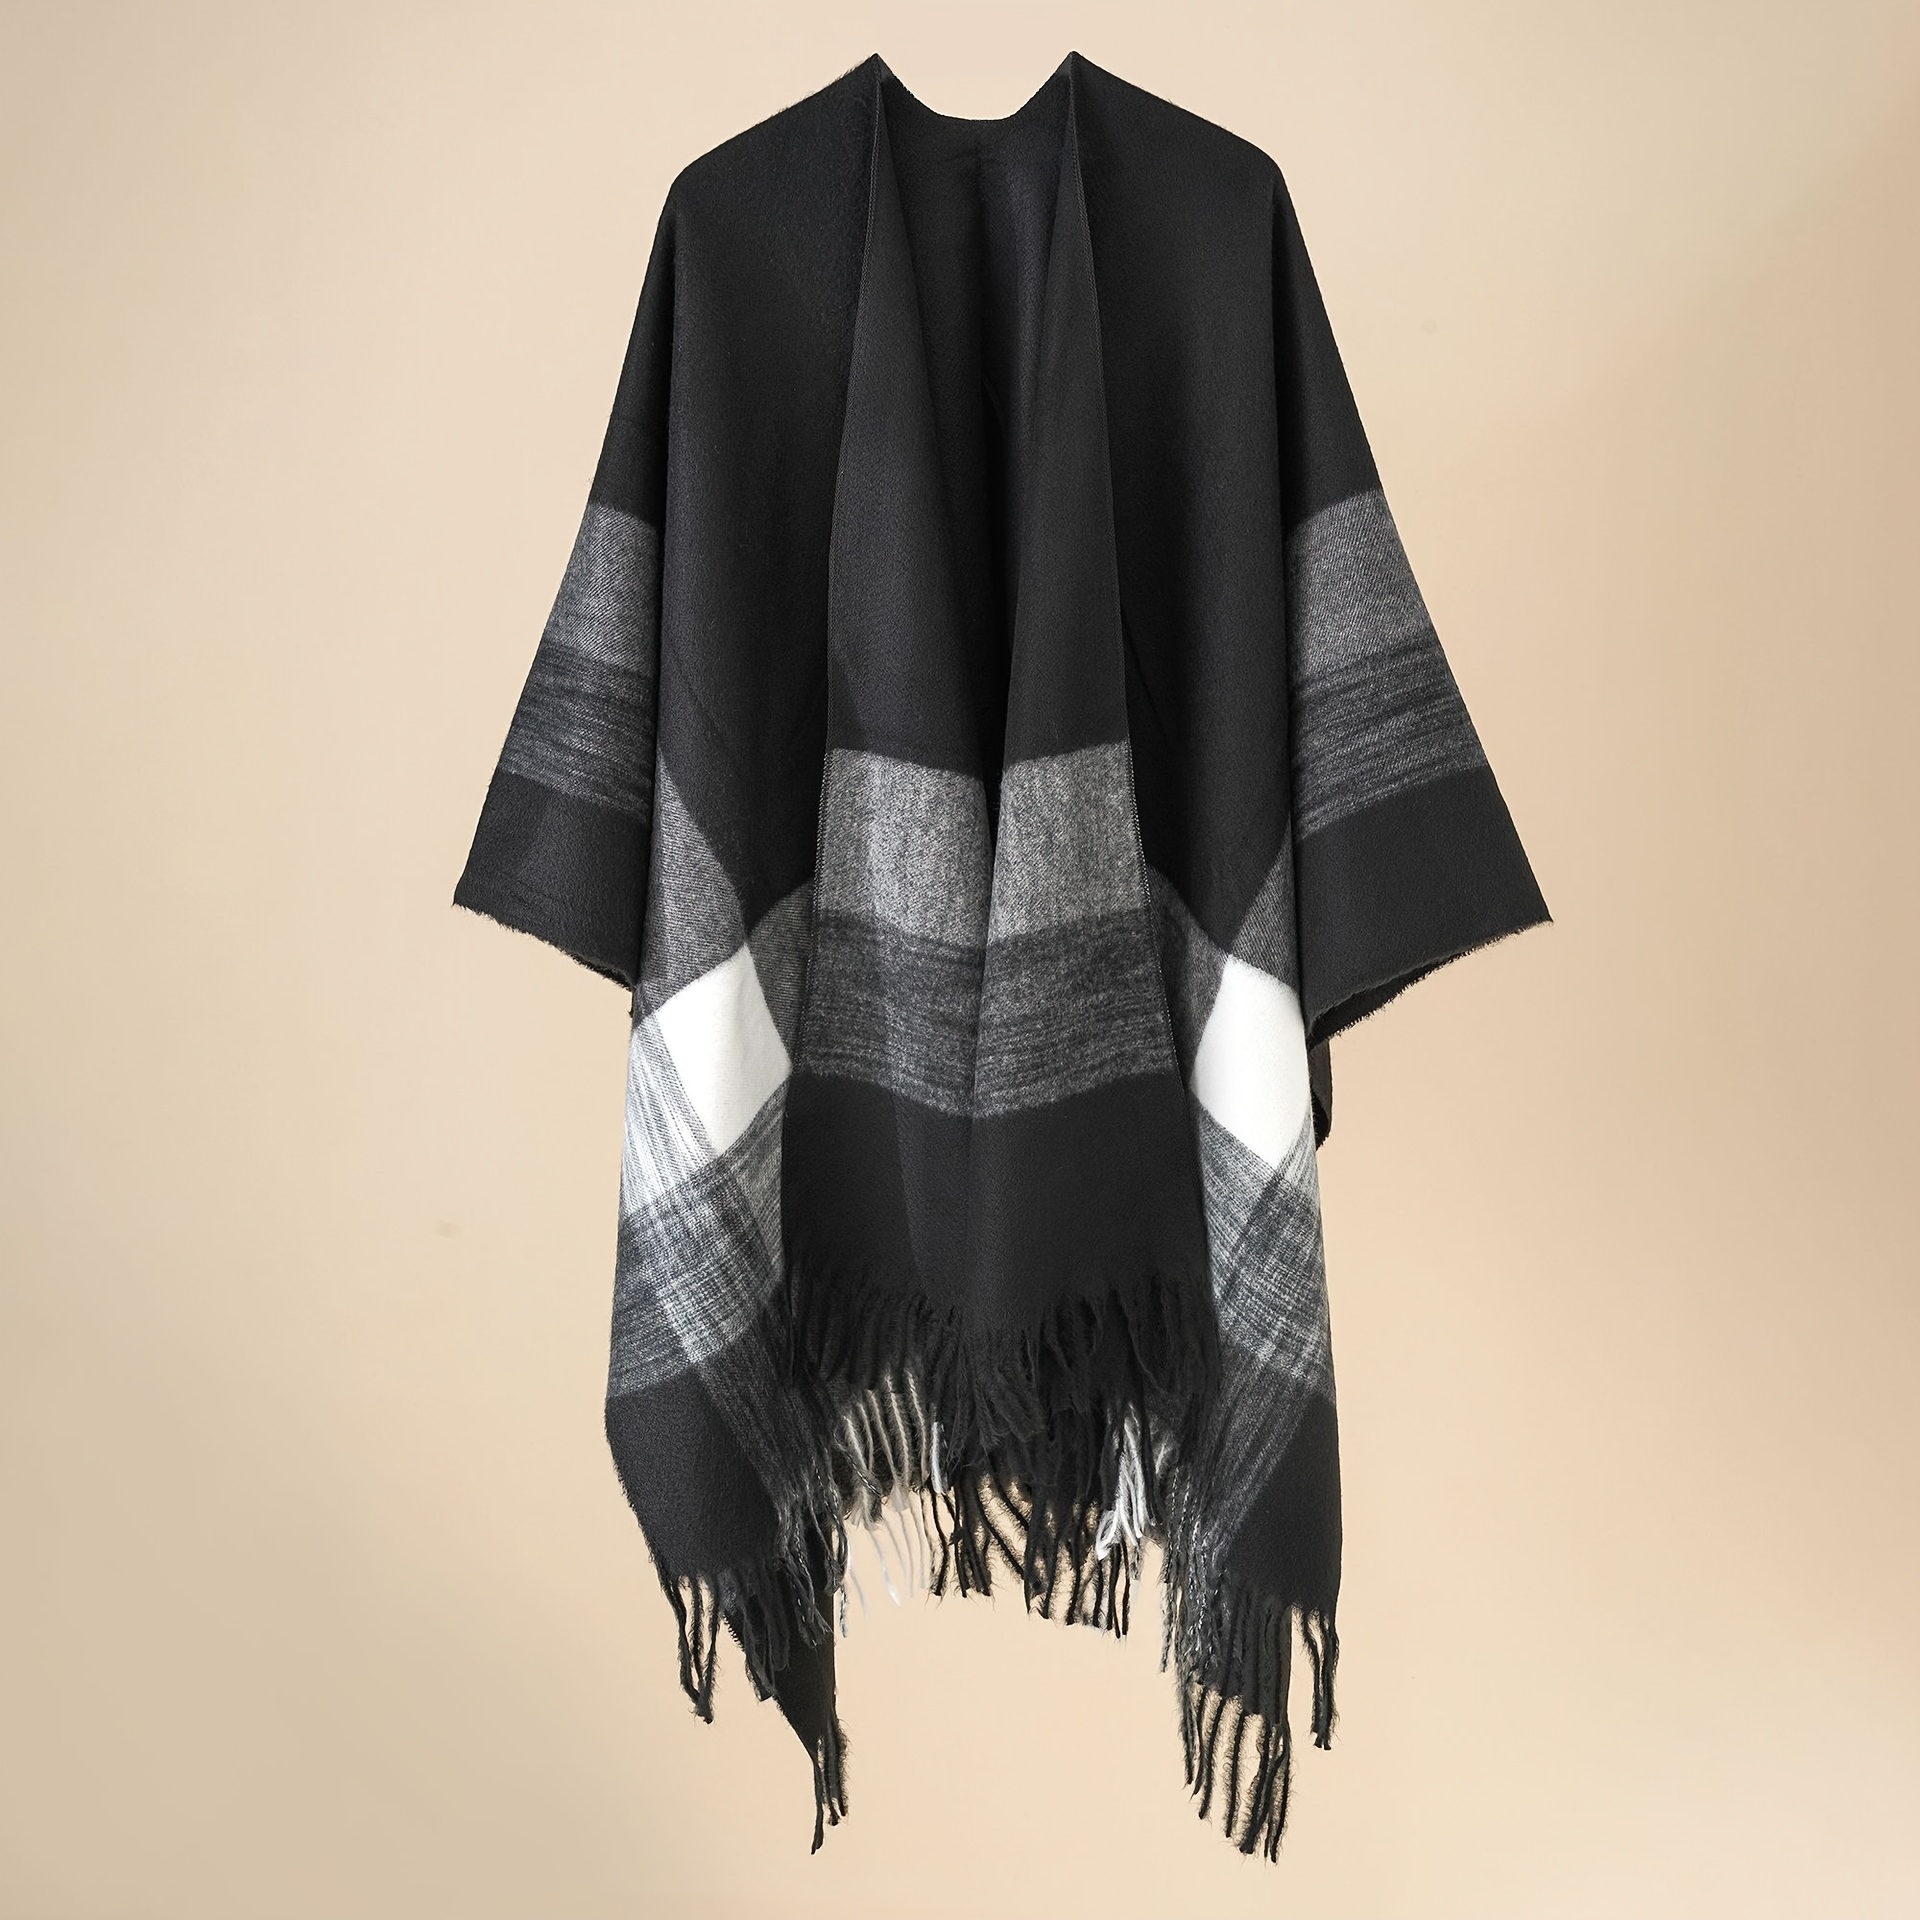 

Tassel Thermal Windproof Plaid Shawl, Winter Keep Warm Soft Comfortable Shawl Wrap, Open Front Poncho Cape, Winter Blanket For Cycling Riding Walking Skiing Carnival